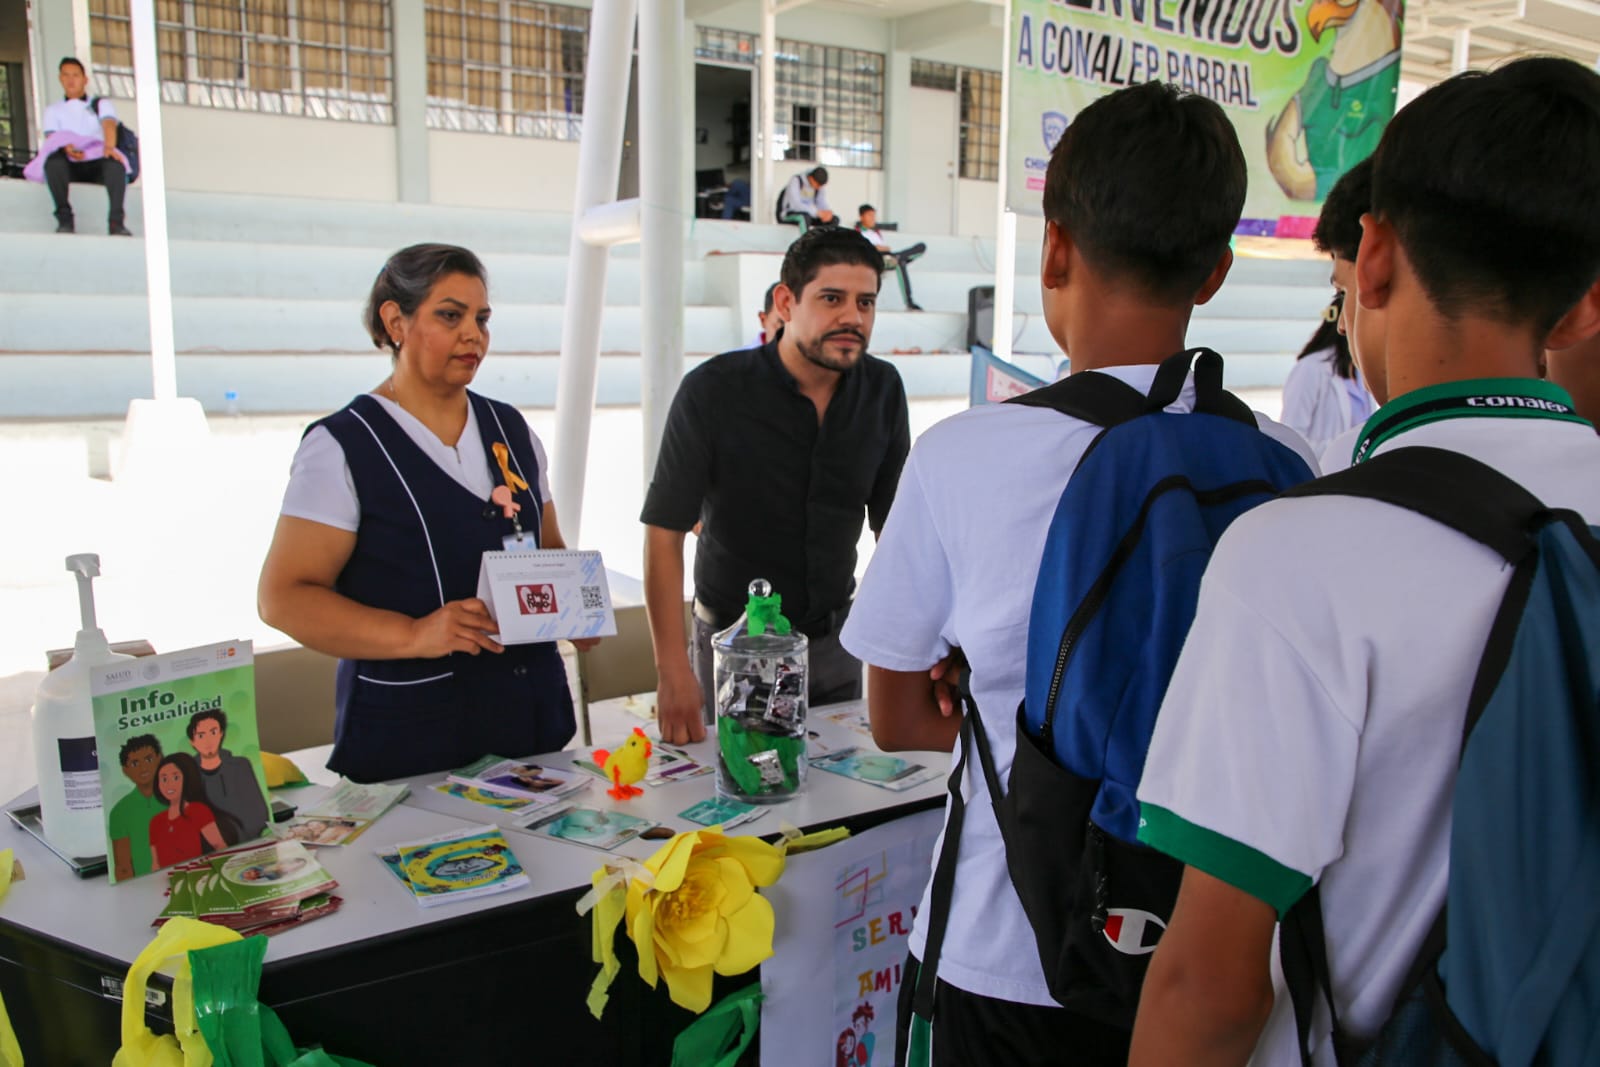 CONALEP organizes the Physical and Mental Health Fair in Parral